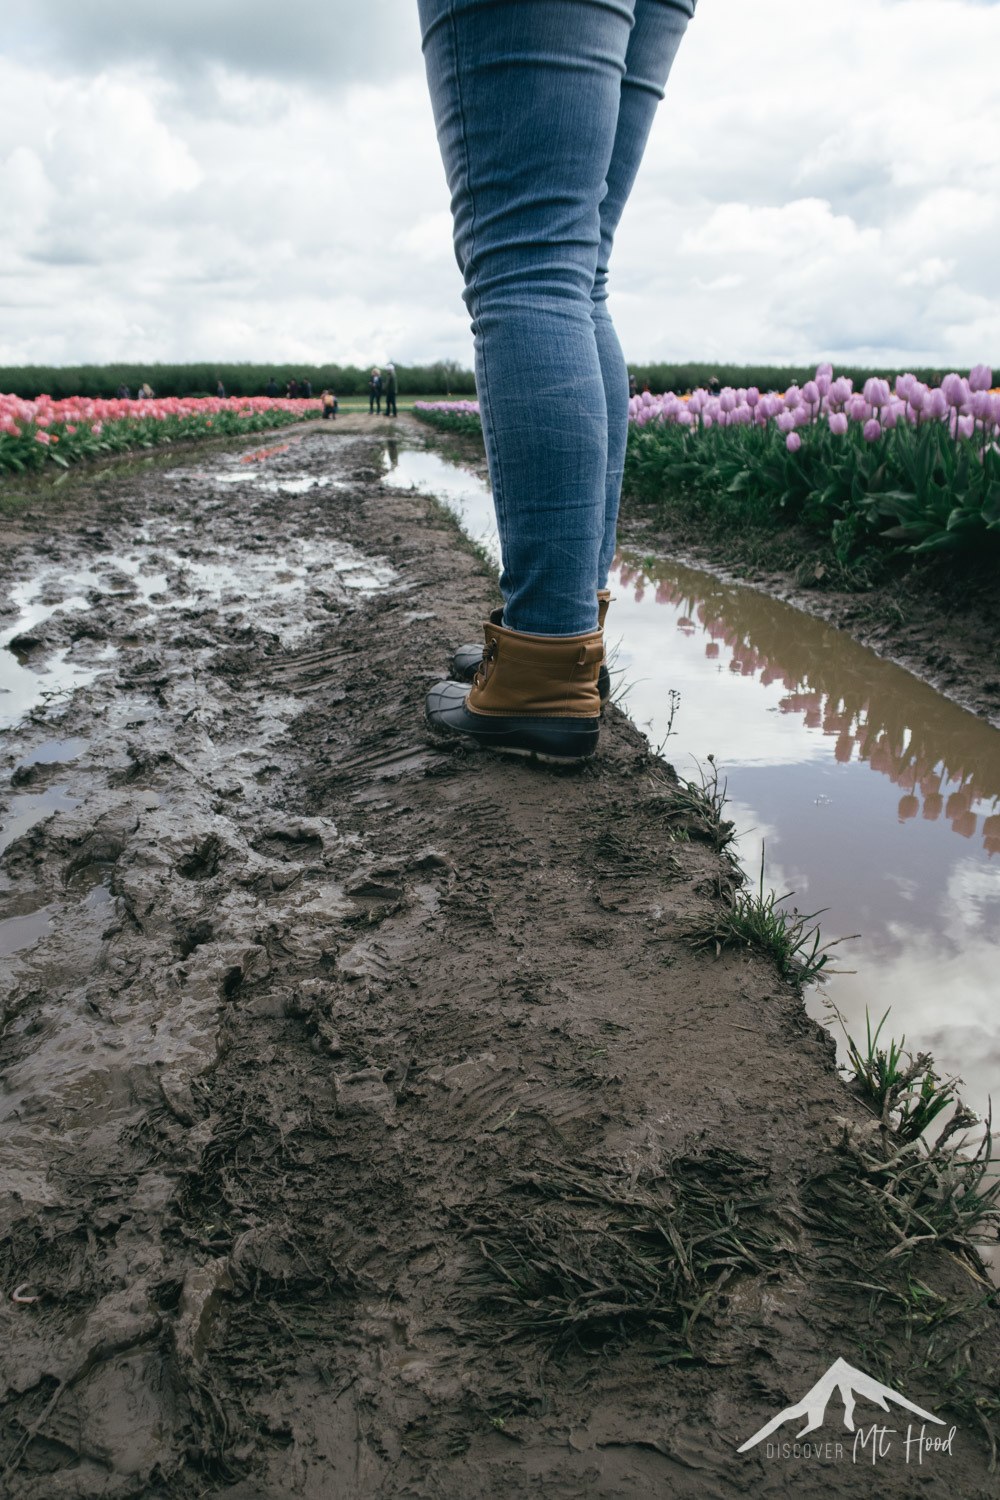 Girl wearing boots in mud while walking next to tulips